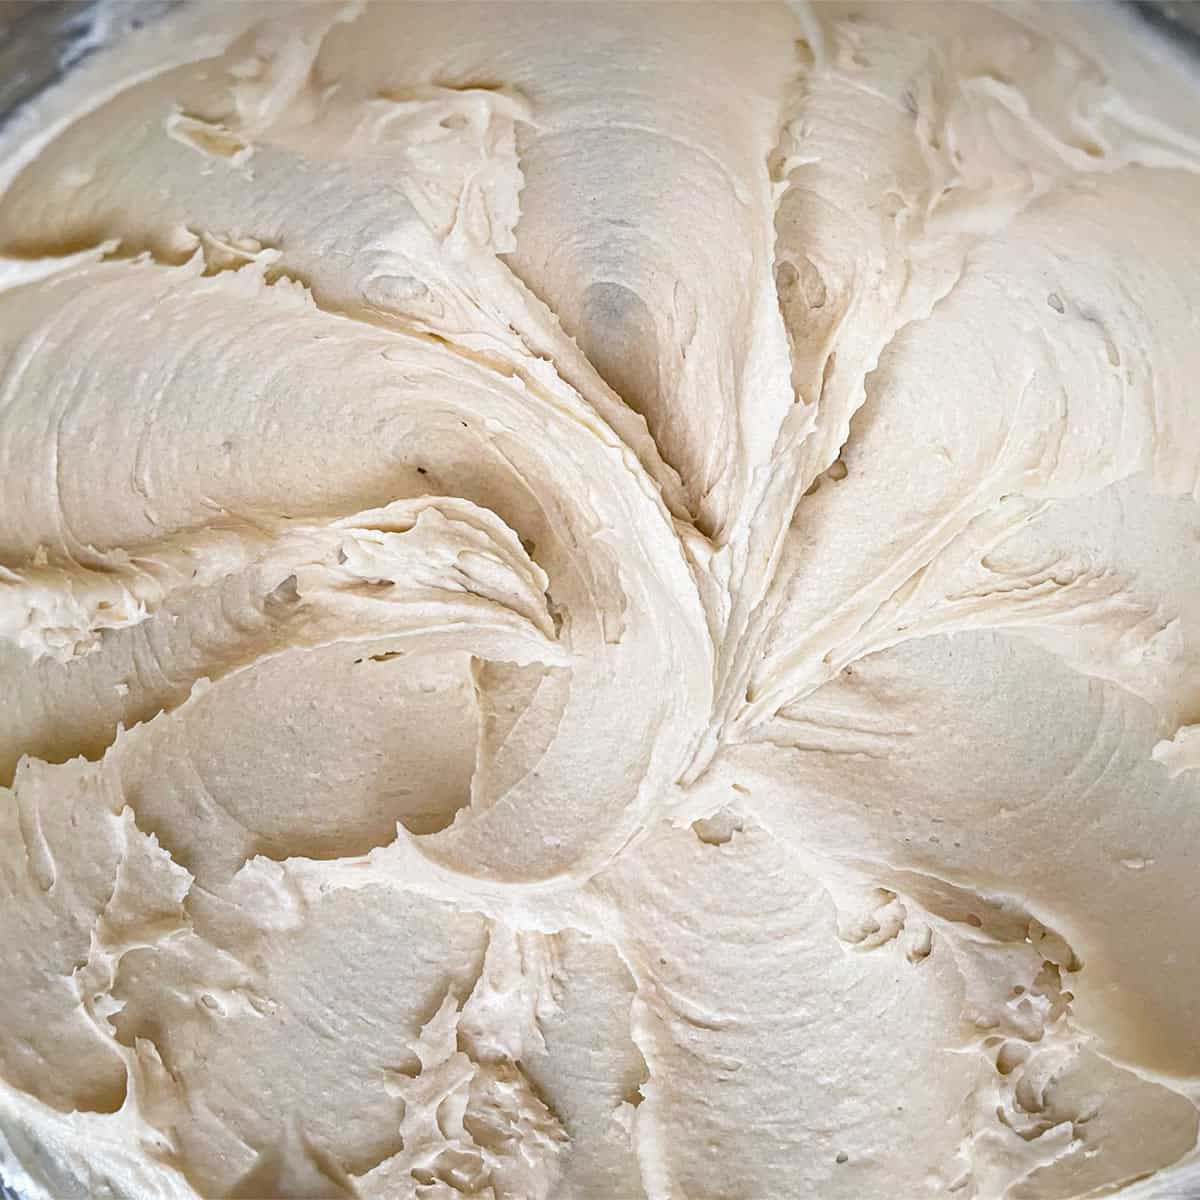 Butter, cream cheese and sugars looking light brown and creamy swirls.